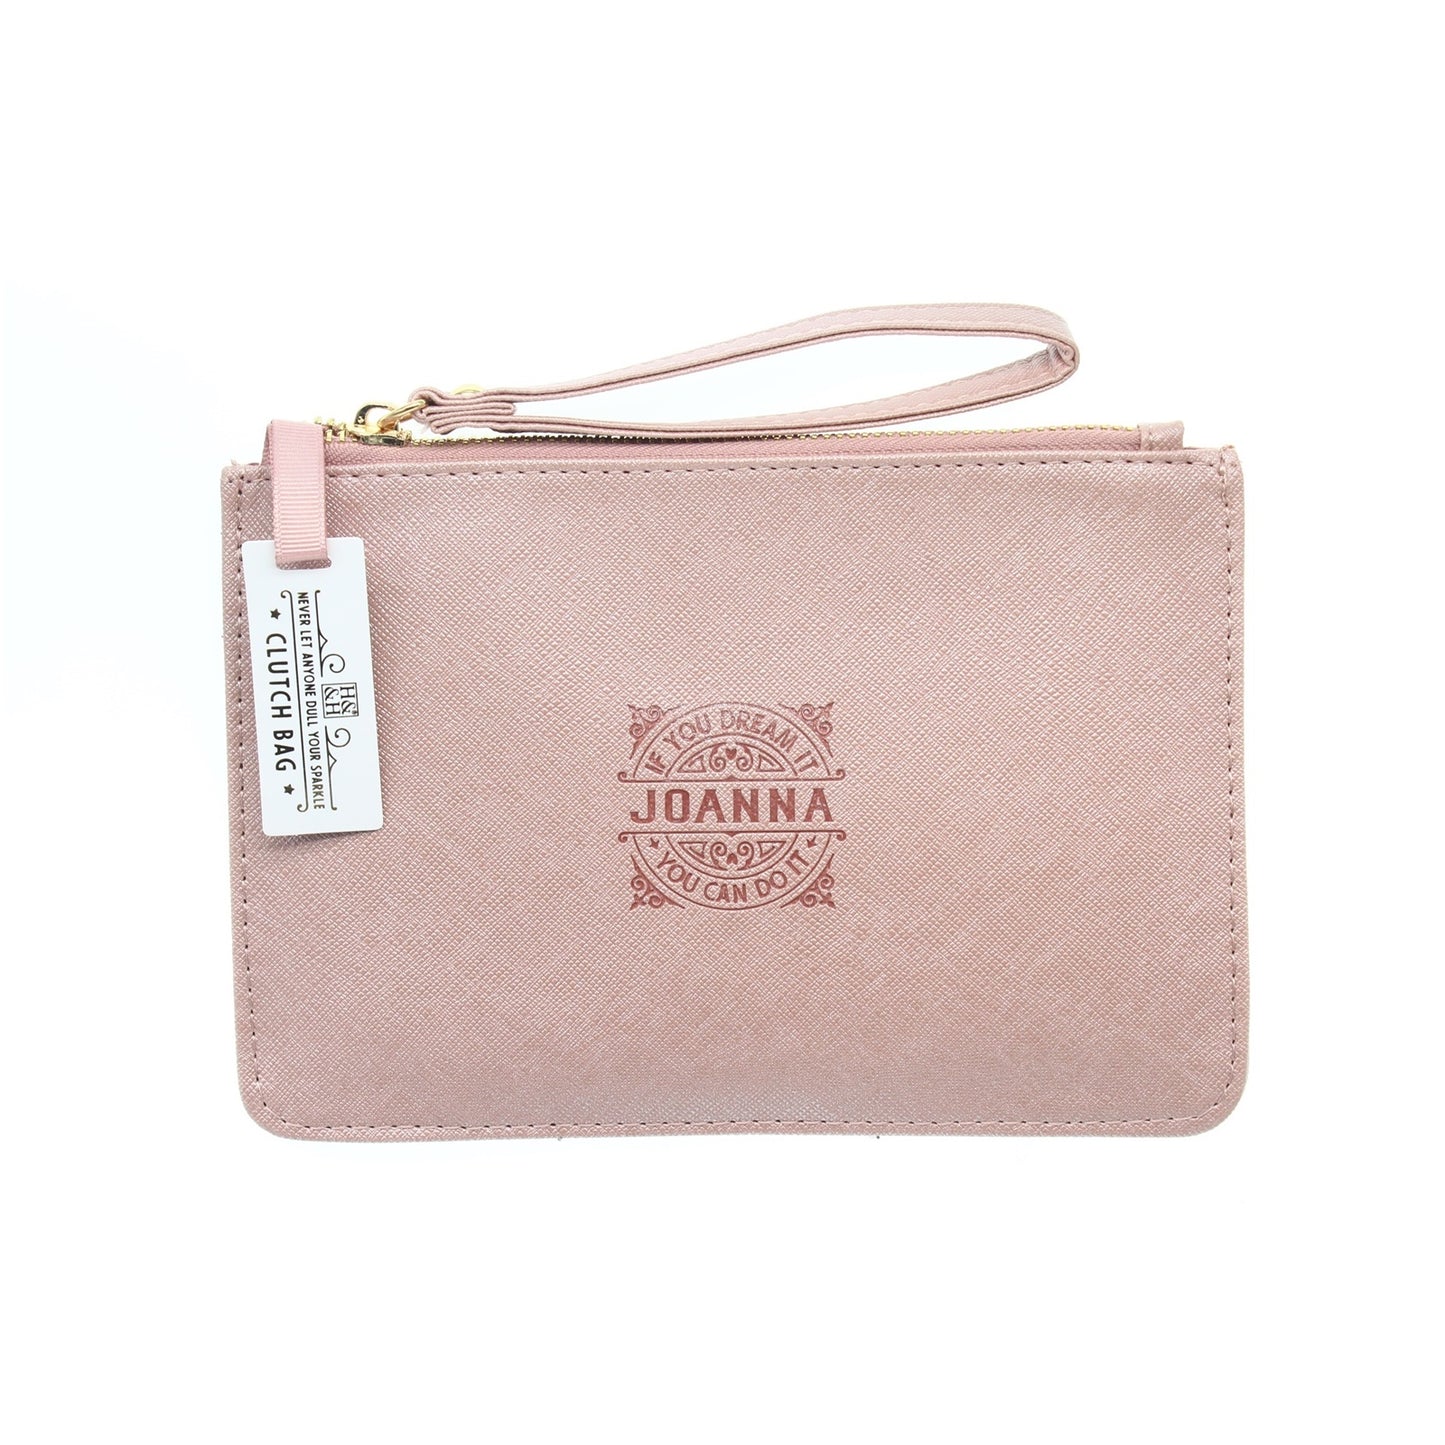 Clutch Bag With Handle & Embossed Text "Joanna"